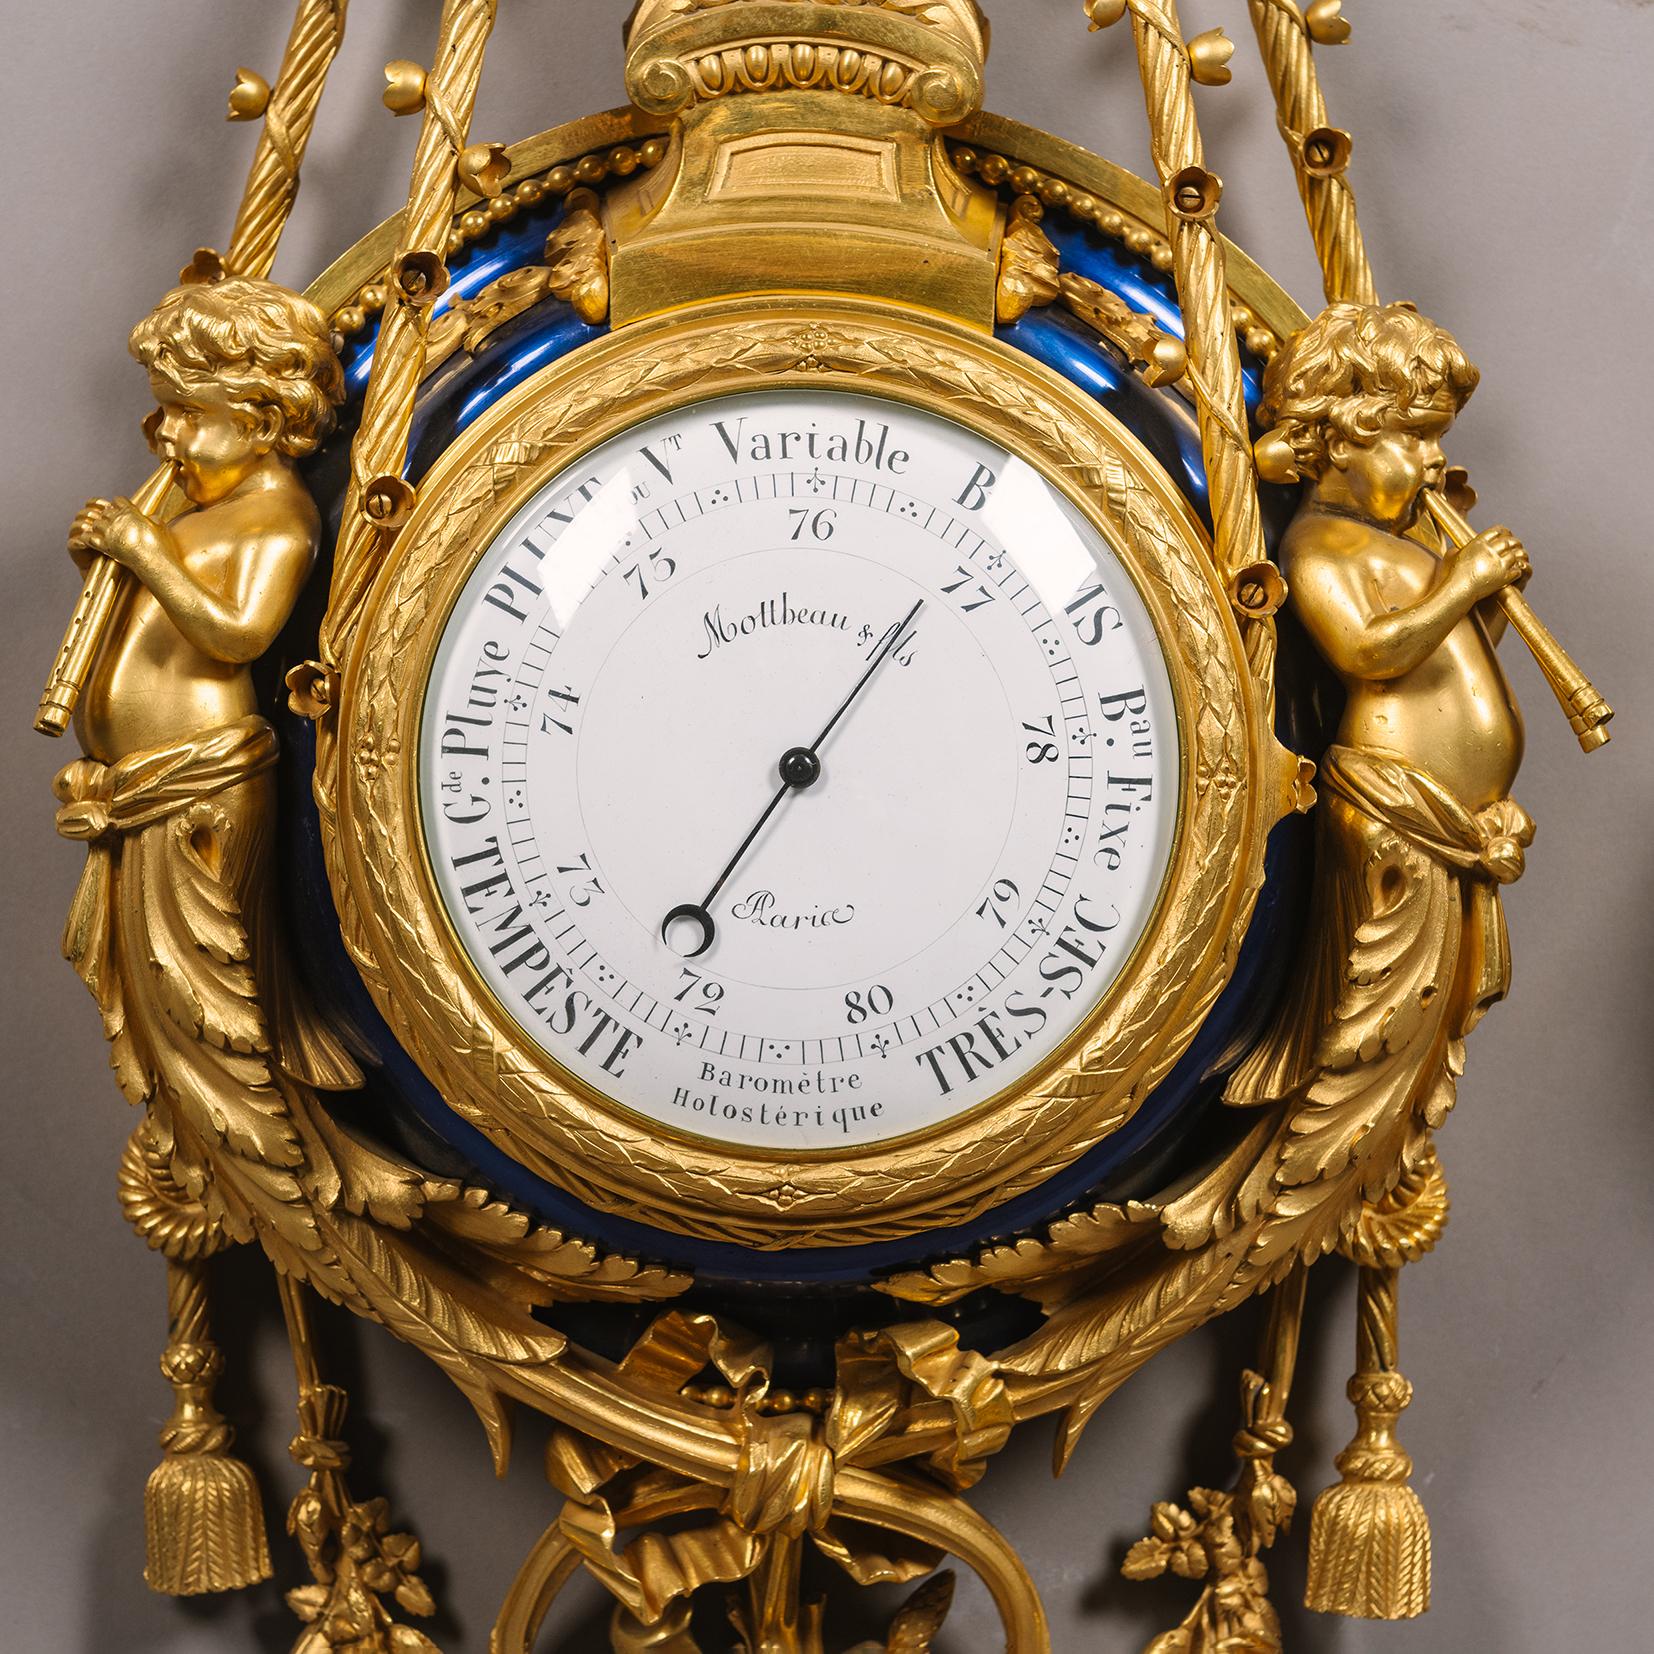 A Louis XVI Style Gilt-Bronze and Blue Enamel Cartel Clock and Barometer, By Maison Mottheau & Fils., Paris.

This exceptional cartel clock and aneroid barometer exhibit the finest production of the bronzier Mottheau & Fils of Paris. The clock